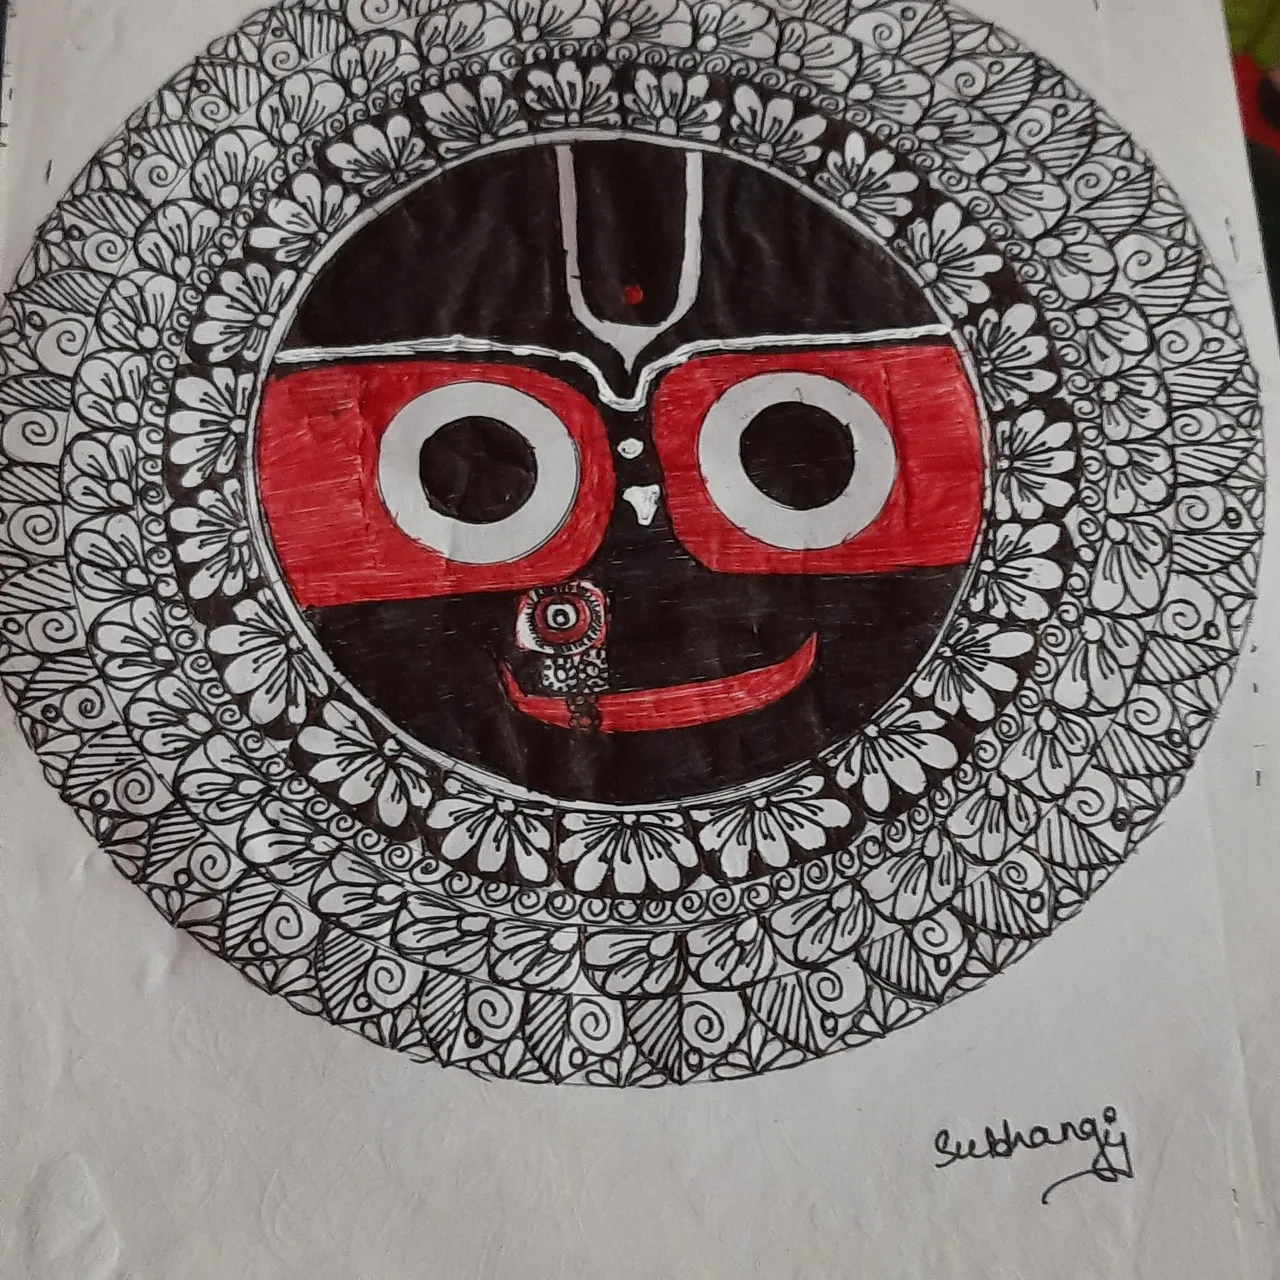 Puri Jagannath Temple: Over 1,392 Royalty-Free Licensable Stock  Illustrations & Drawings | Shutterstock